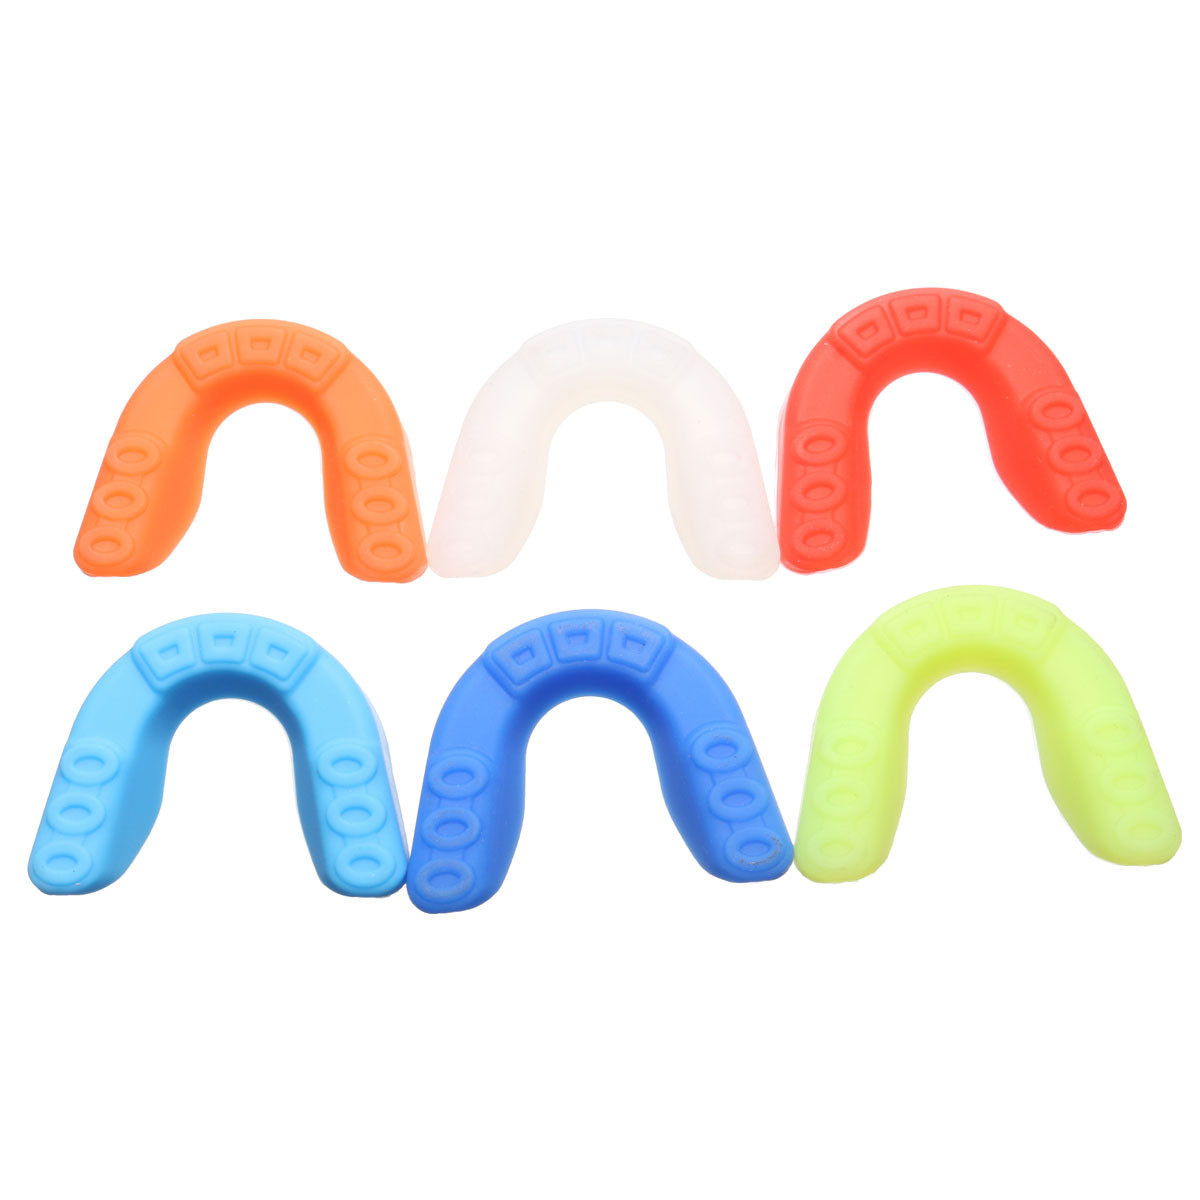 Silicone-Mouth-Guard-Gum-Shield-Boil-Bite-Teeth-Protection-for-MMA-Boxing-Braces-1632894-5